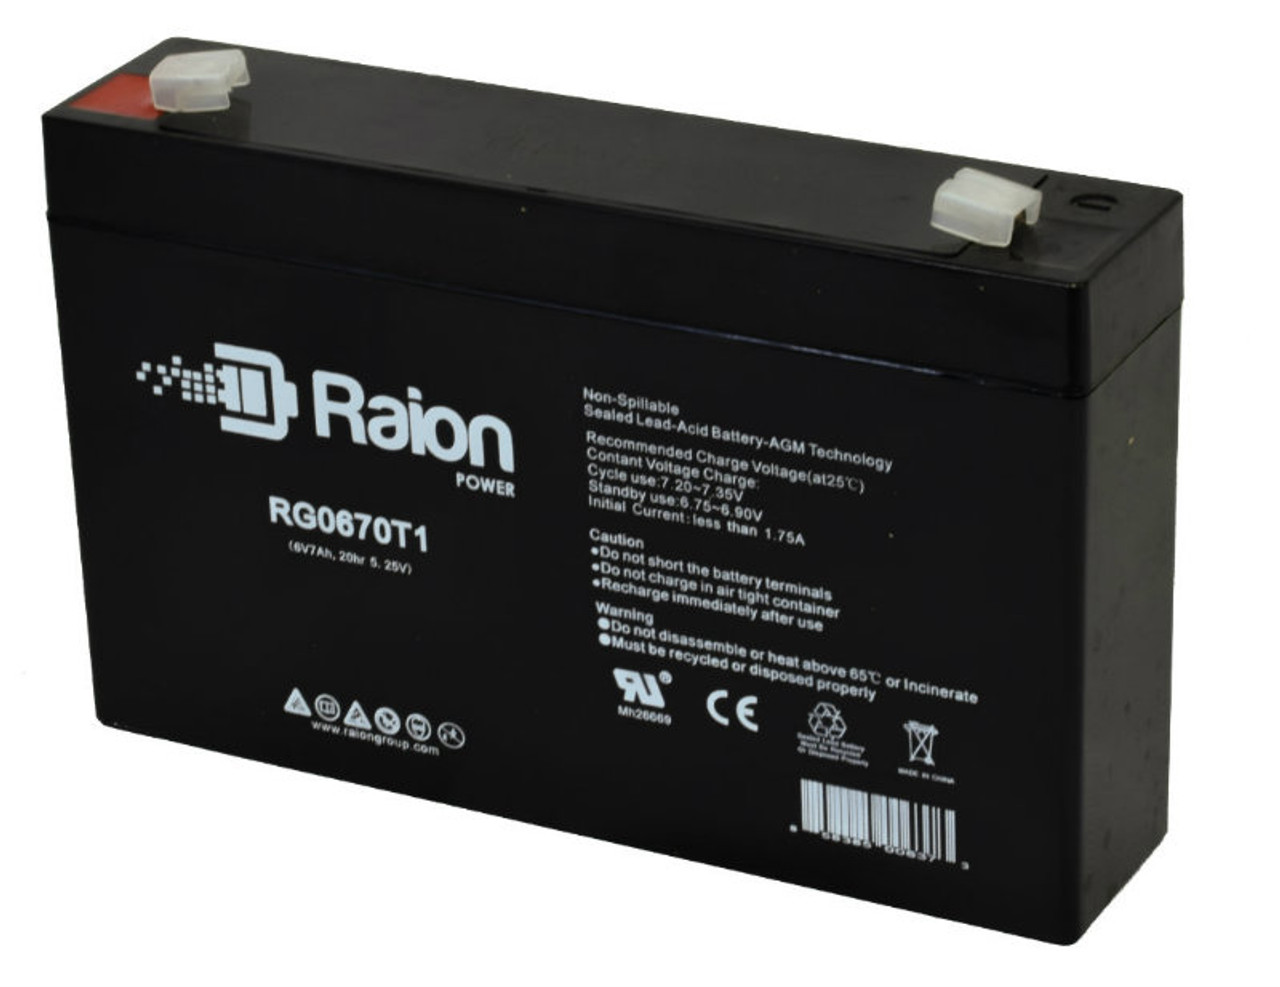 Raion Power RG0670T1 6V 7Ah Replacement Emergency Lighting Battery for Expocell P206/70